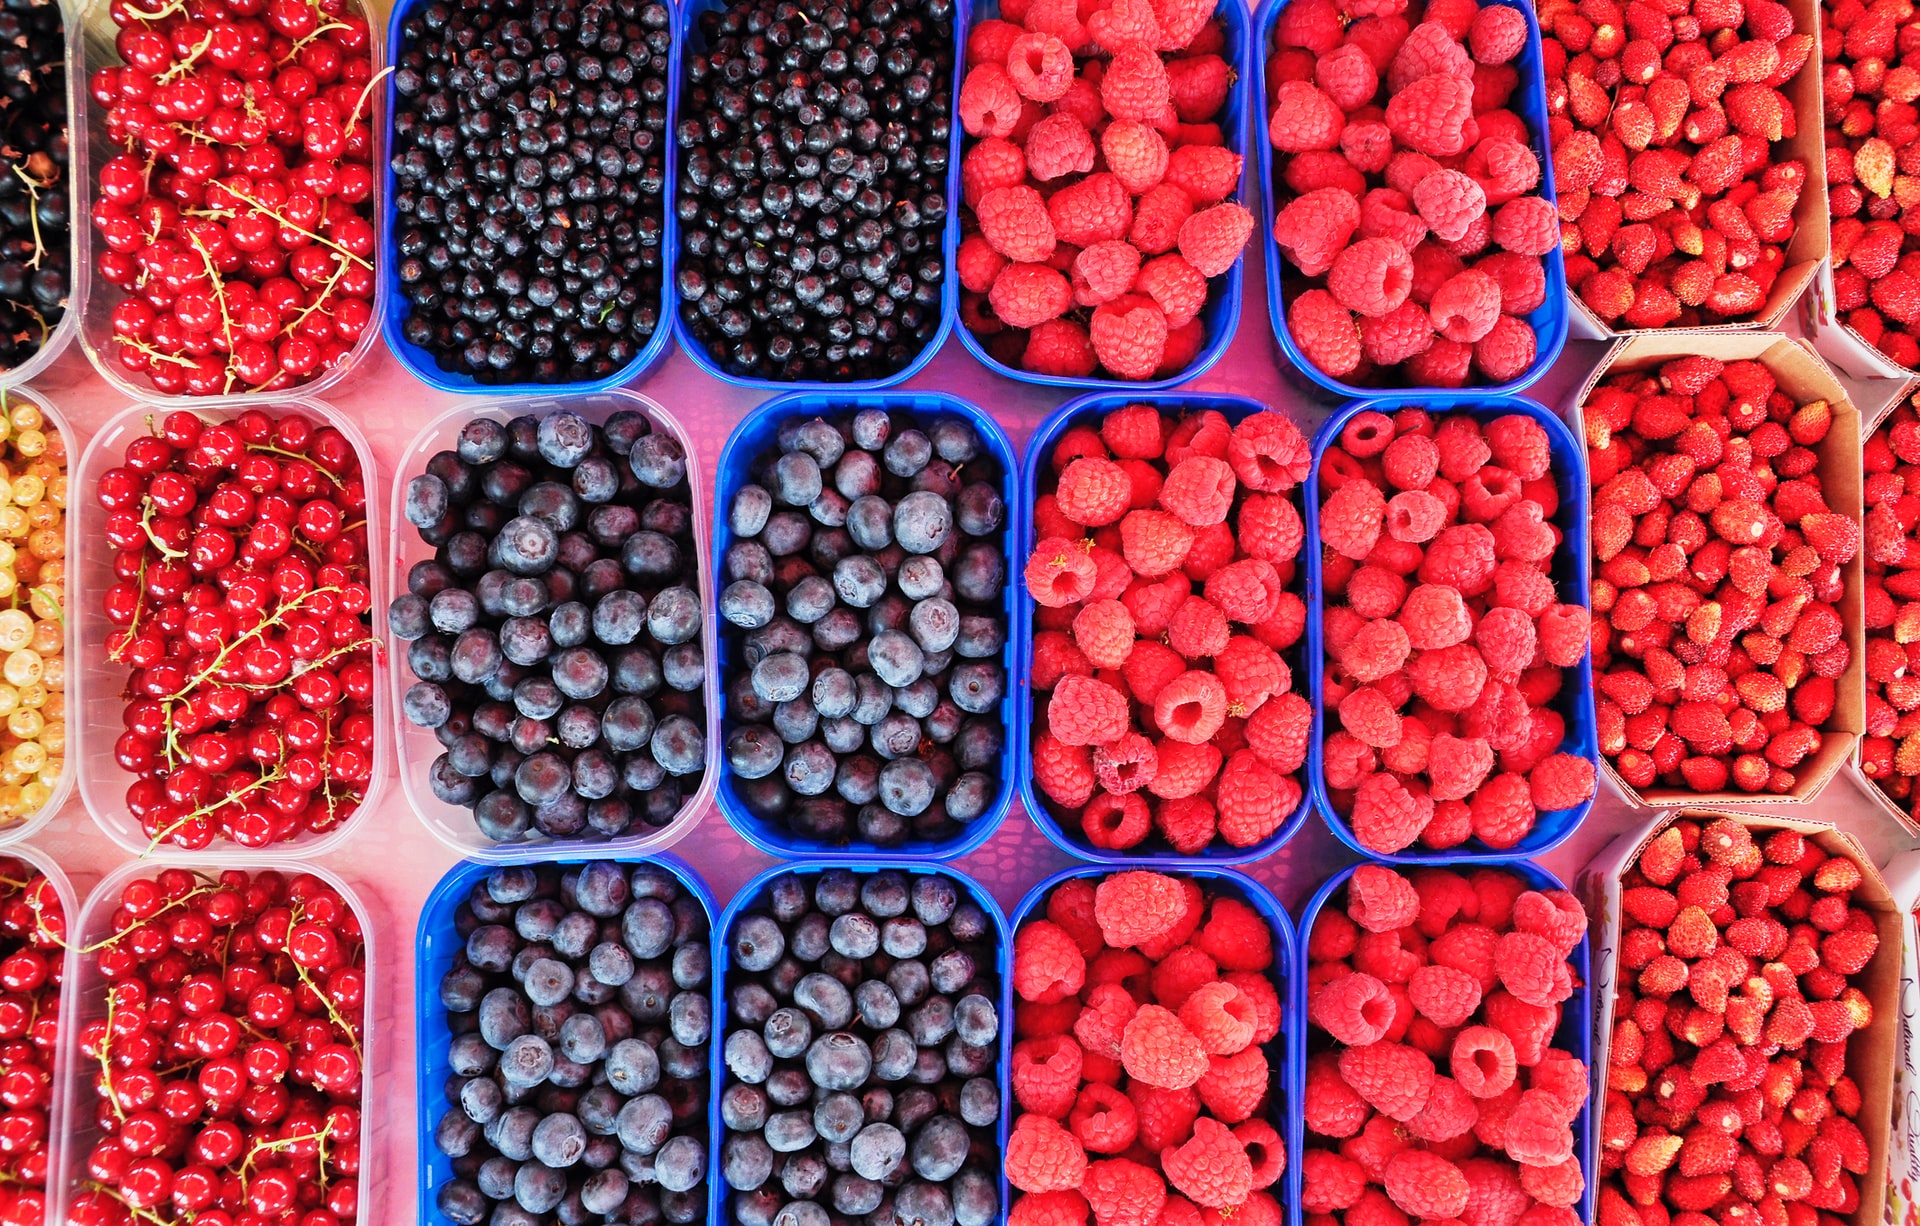 containers of various berries